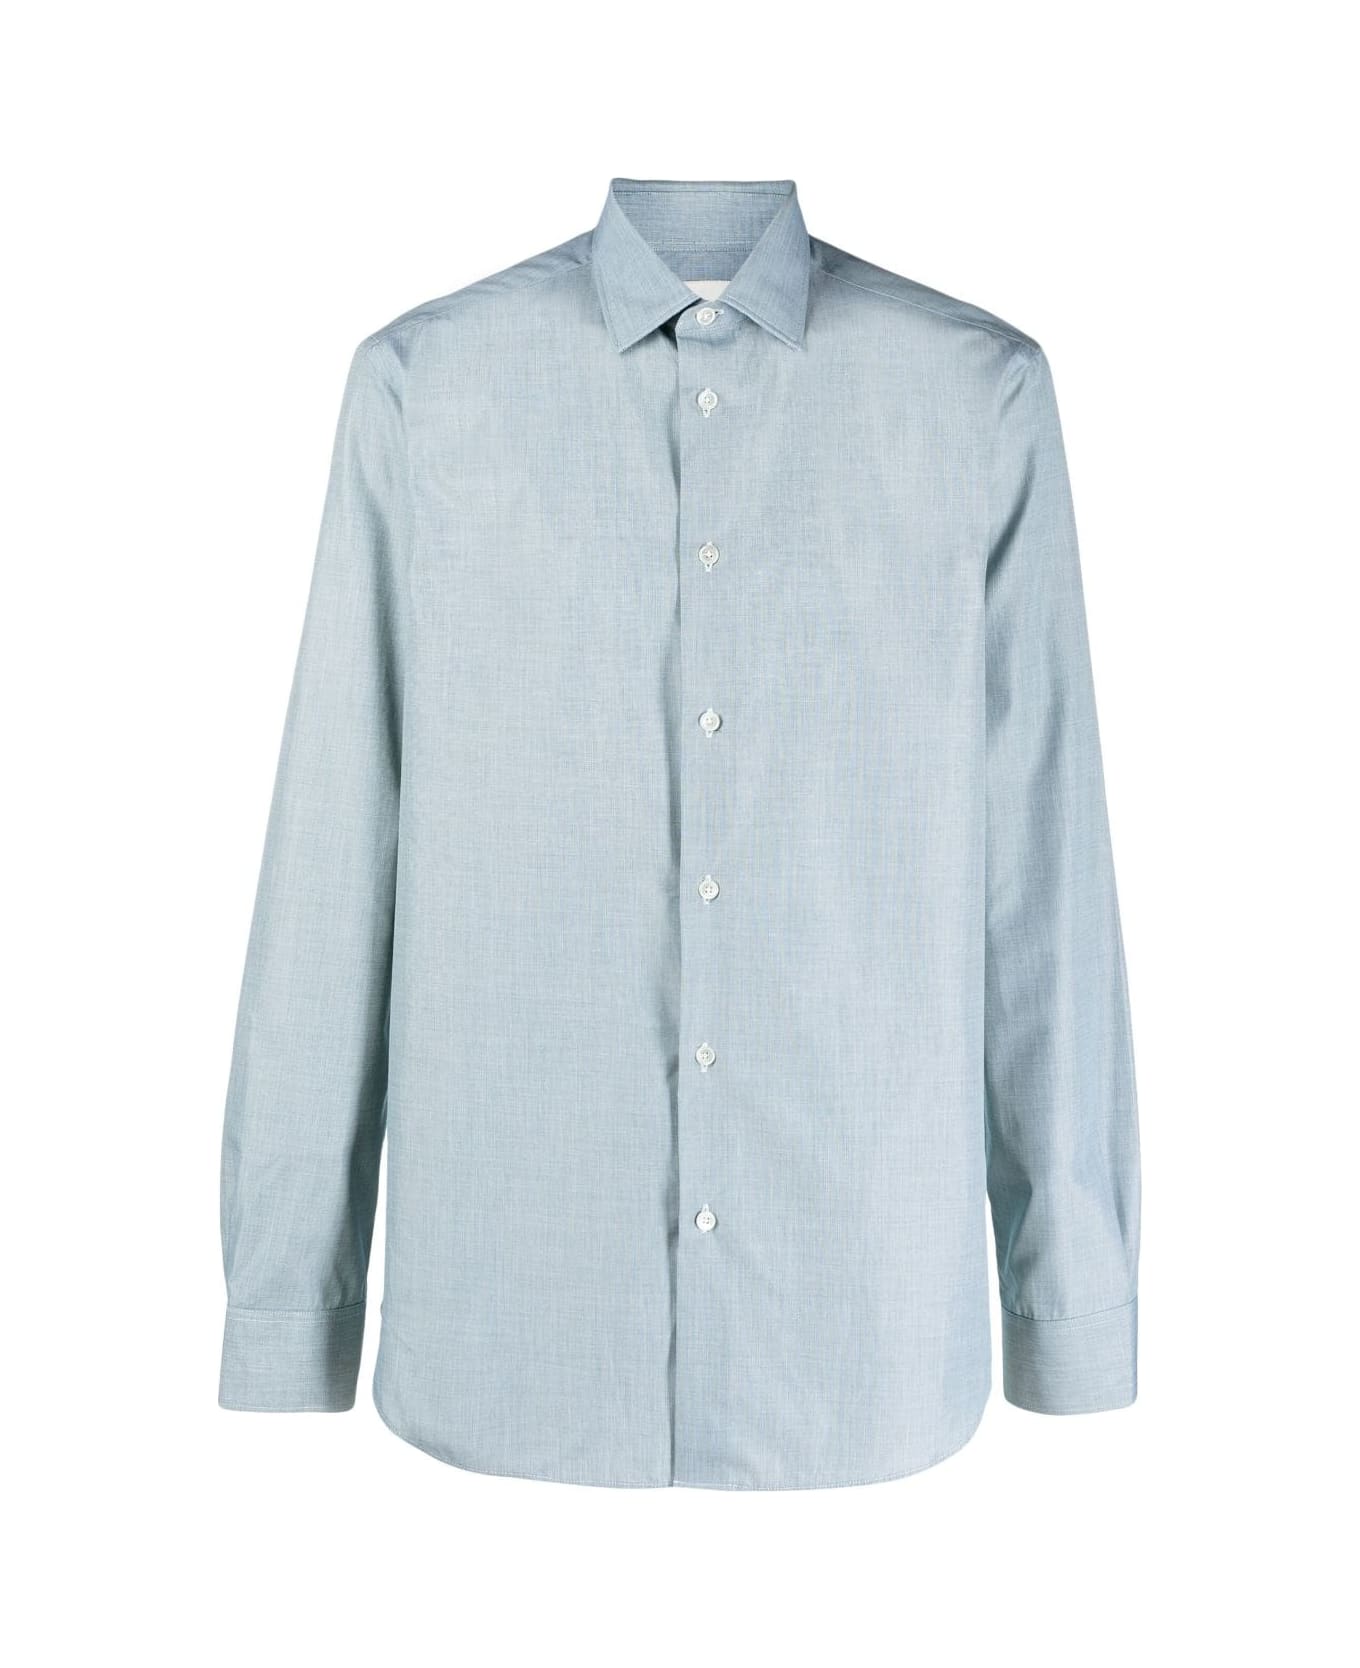 Paul Smith Mens Tailored Fit Shirt - Greens シャツ